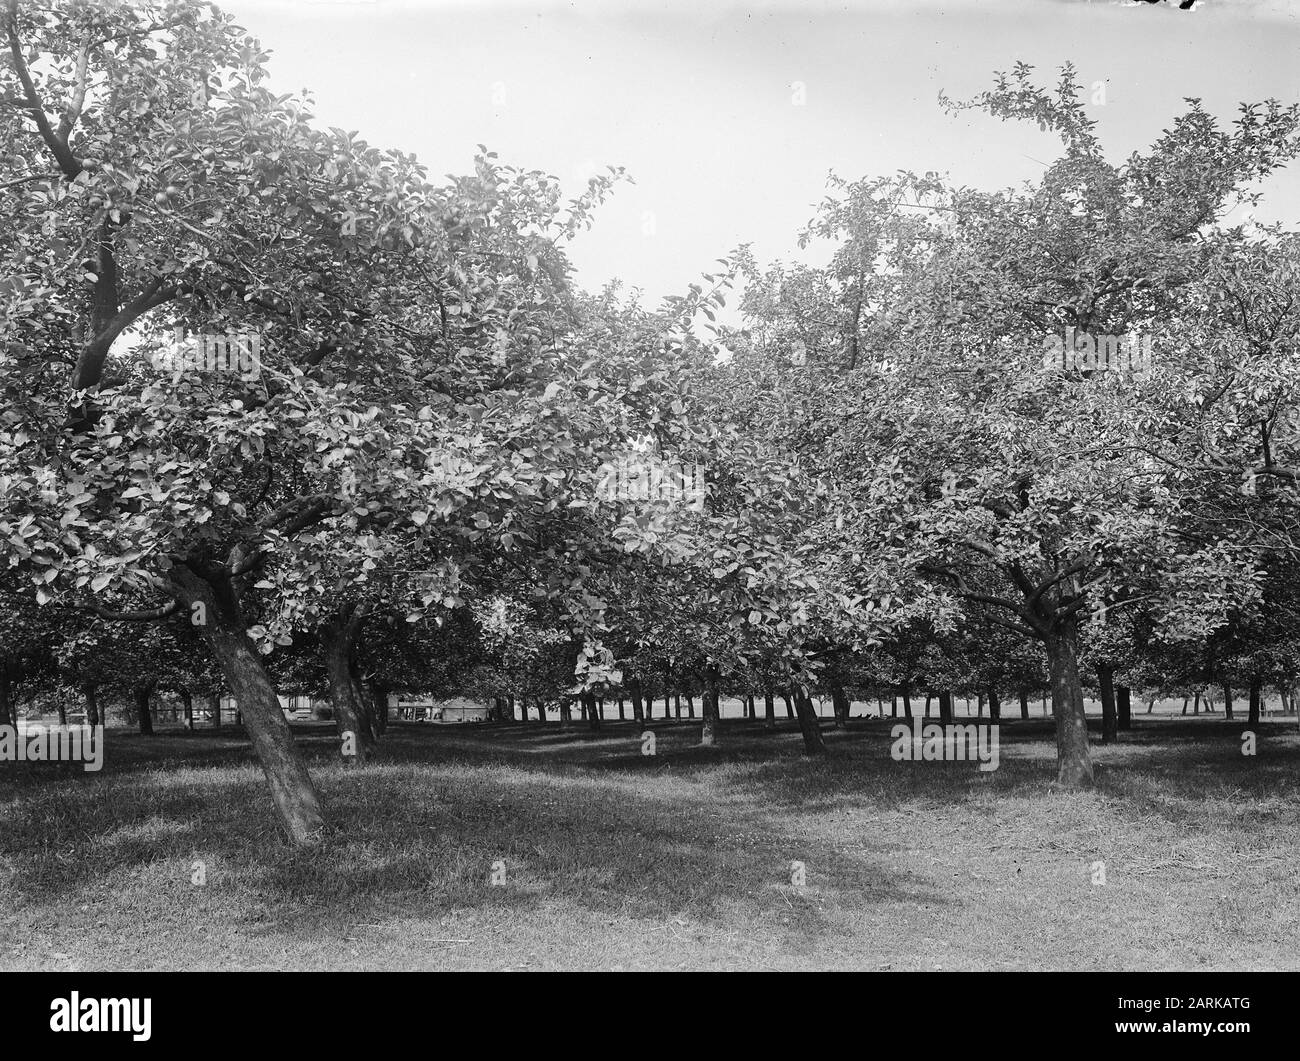 fruit growing, orchards, apples, gold inets Date: undated Keywords: orchards, fruit growing Person name: apples, gold inets Stock Photo